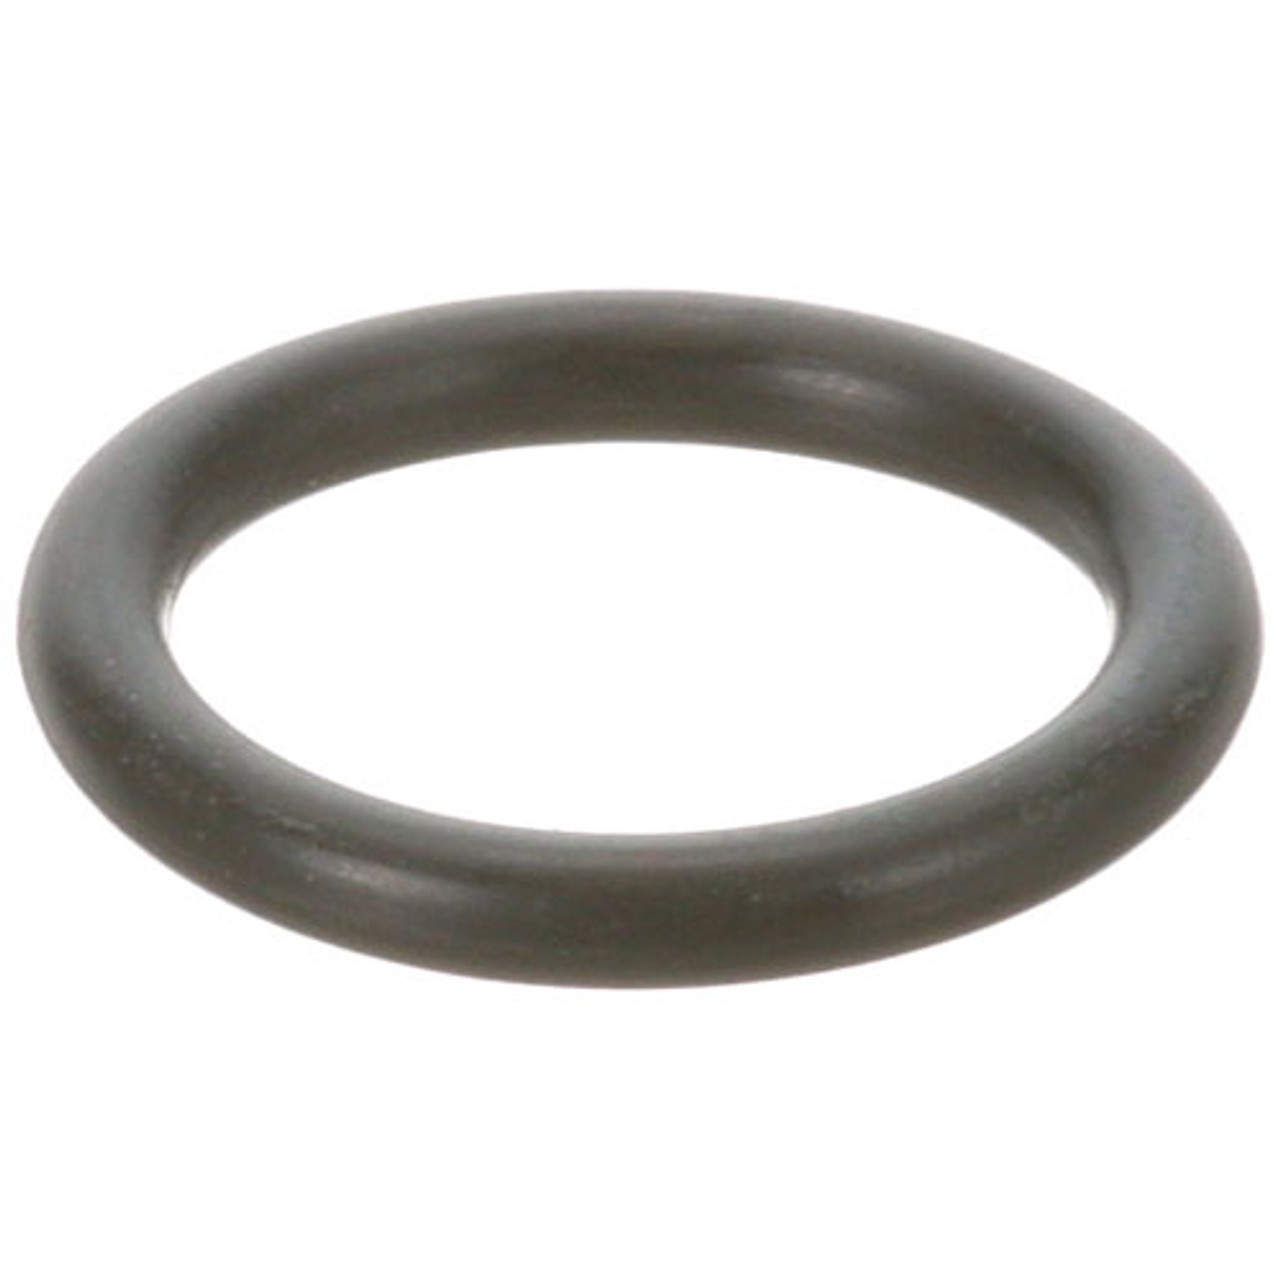 O-Ring 13/16" Id X 1/8" Width - Replacement Part For Hobart 67500-00075